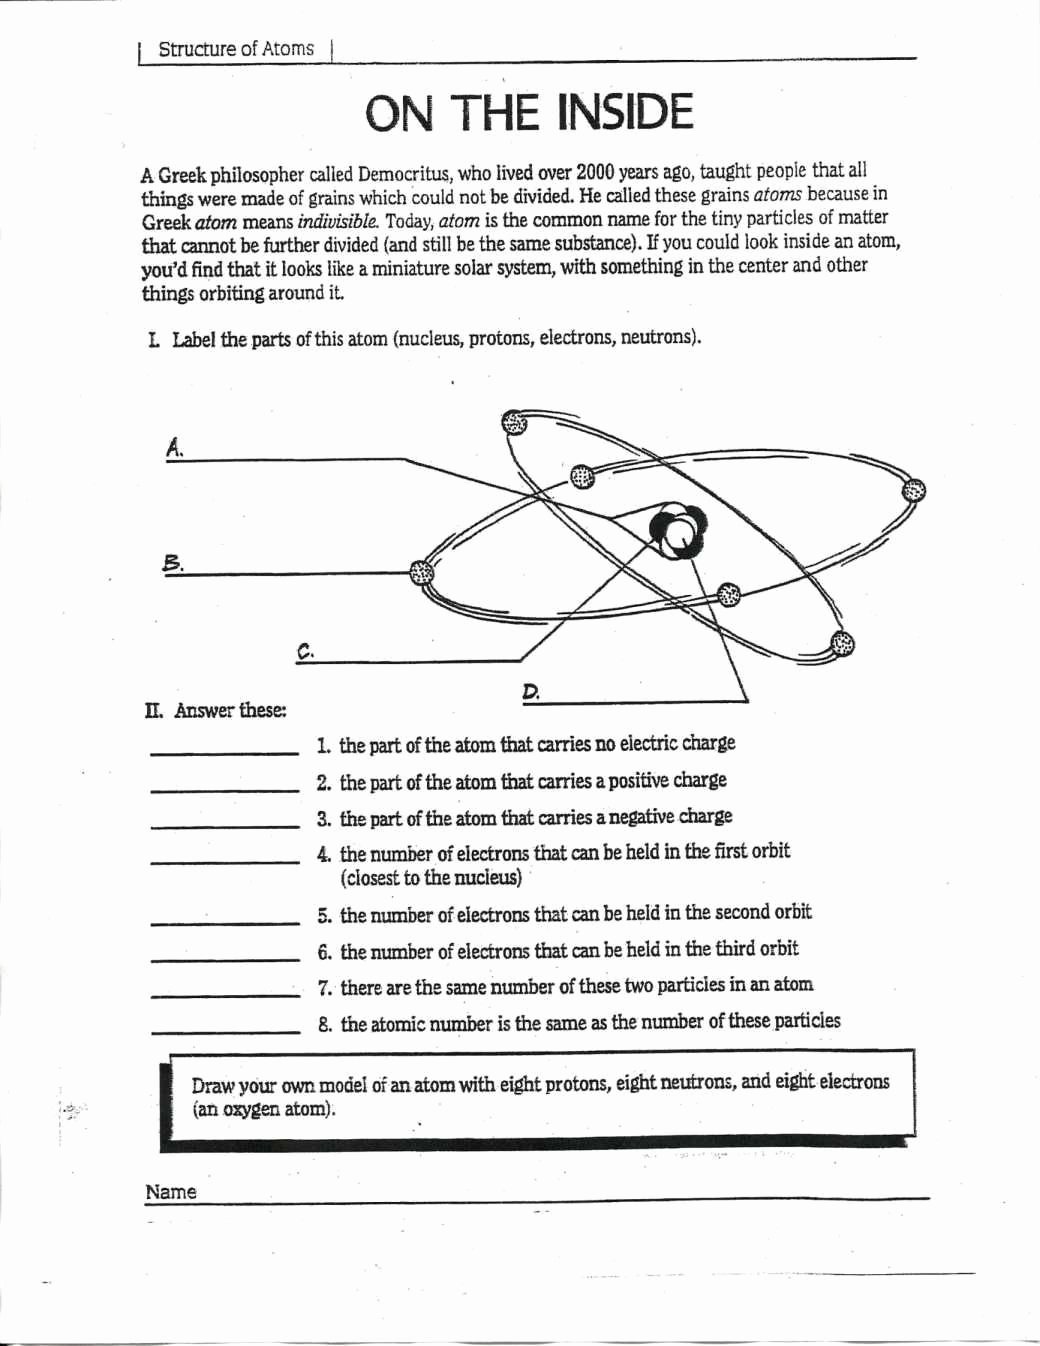 Atoms and isotopes Worksheet Answers Fresh isotopes Ions and atoms Worksheet Answers